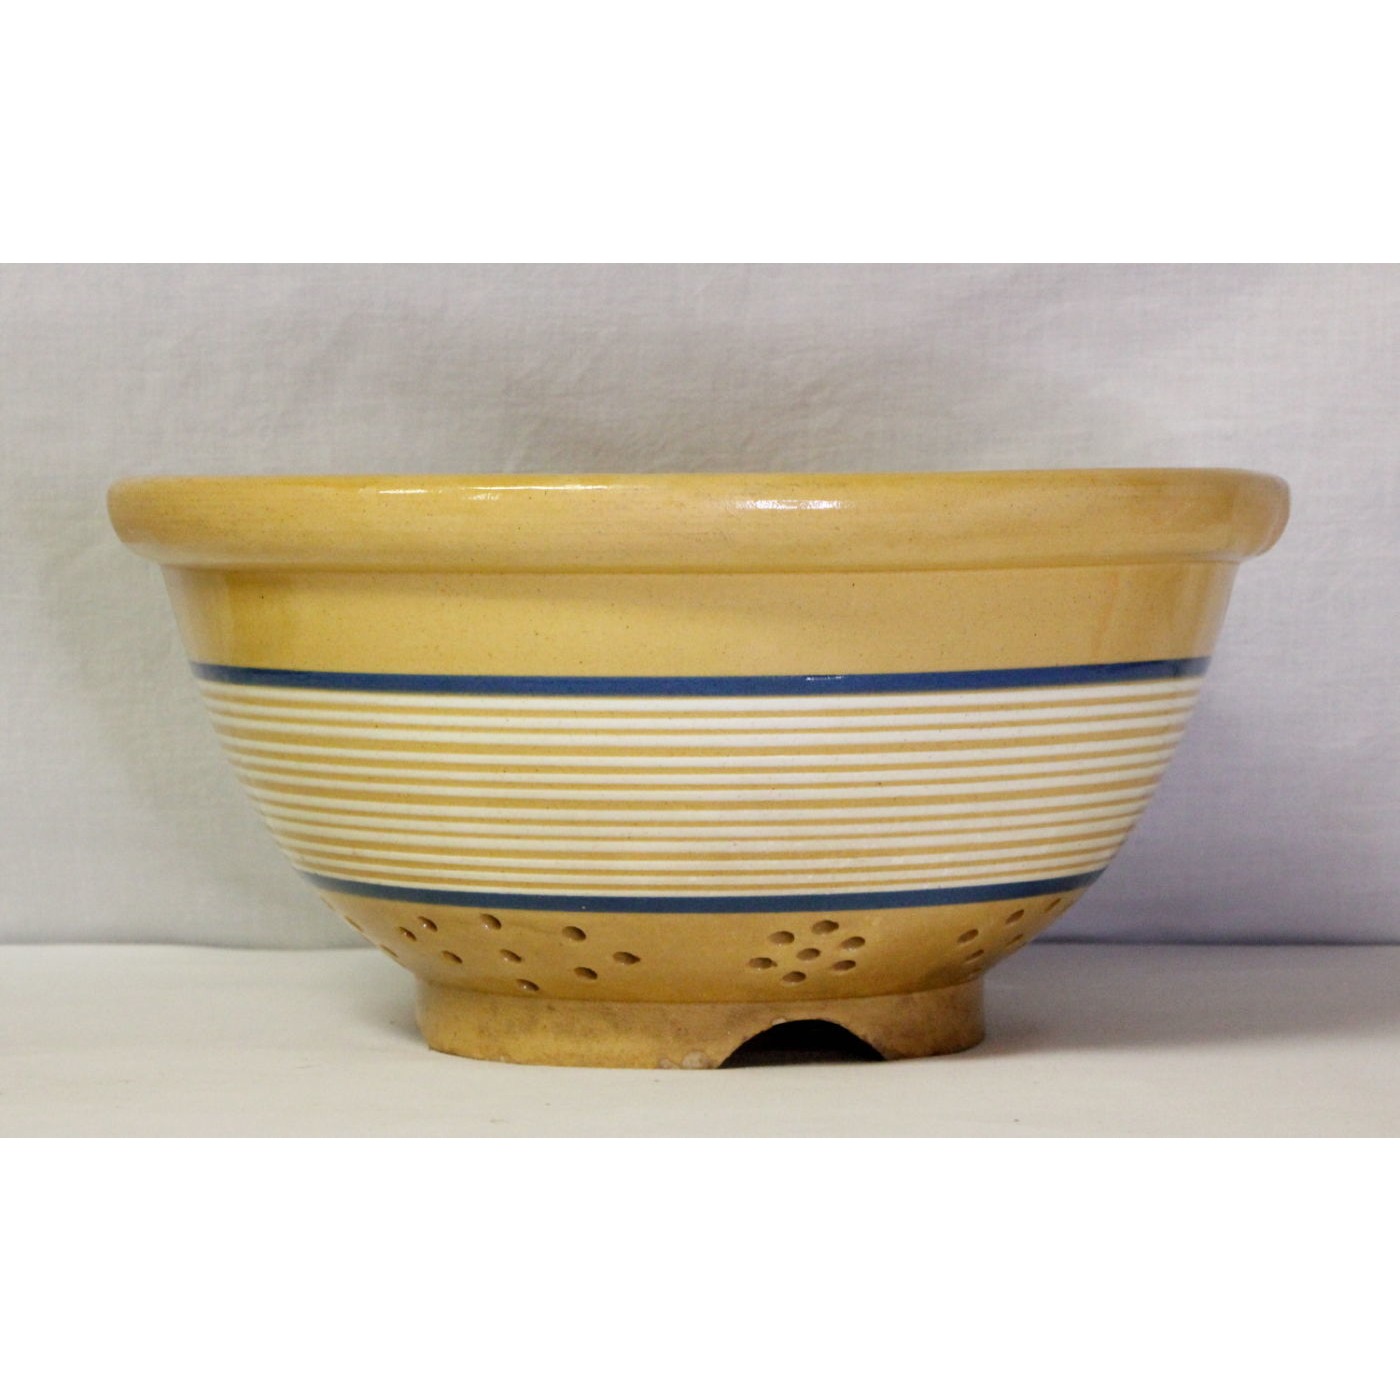 Extraordinary Blue and White Banded Yellow Ware Colander - THE BEST!